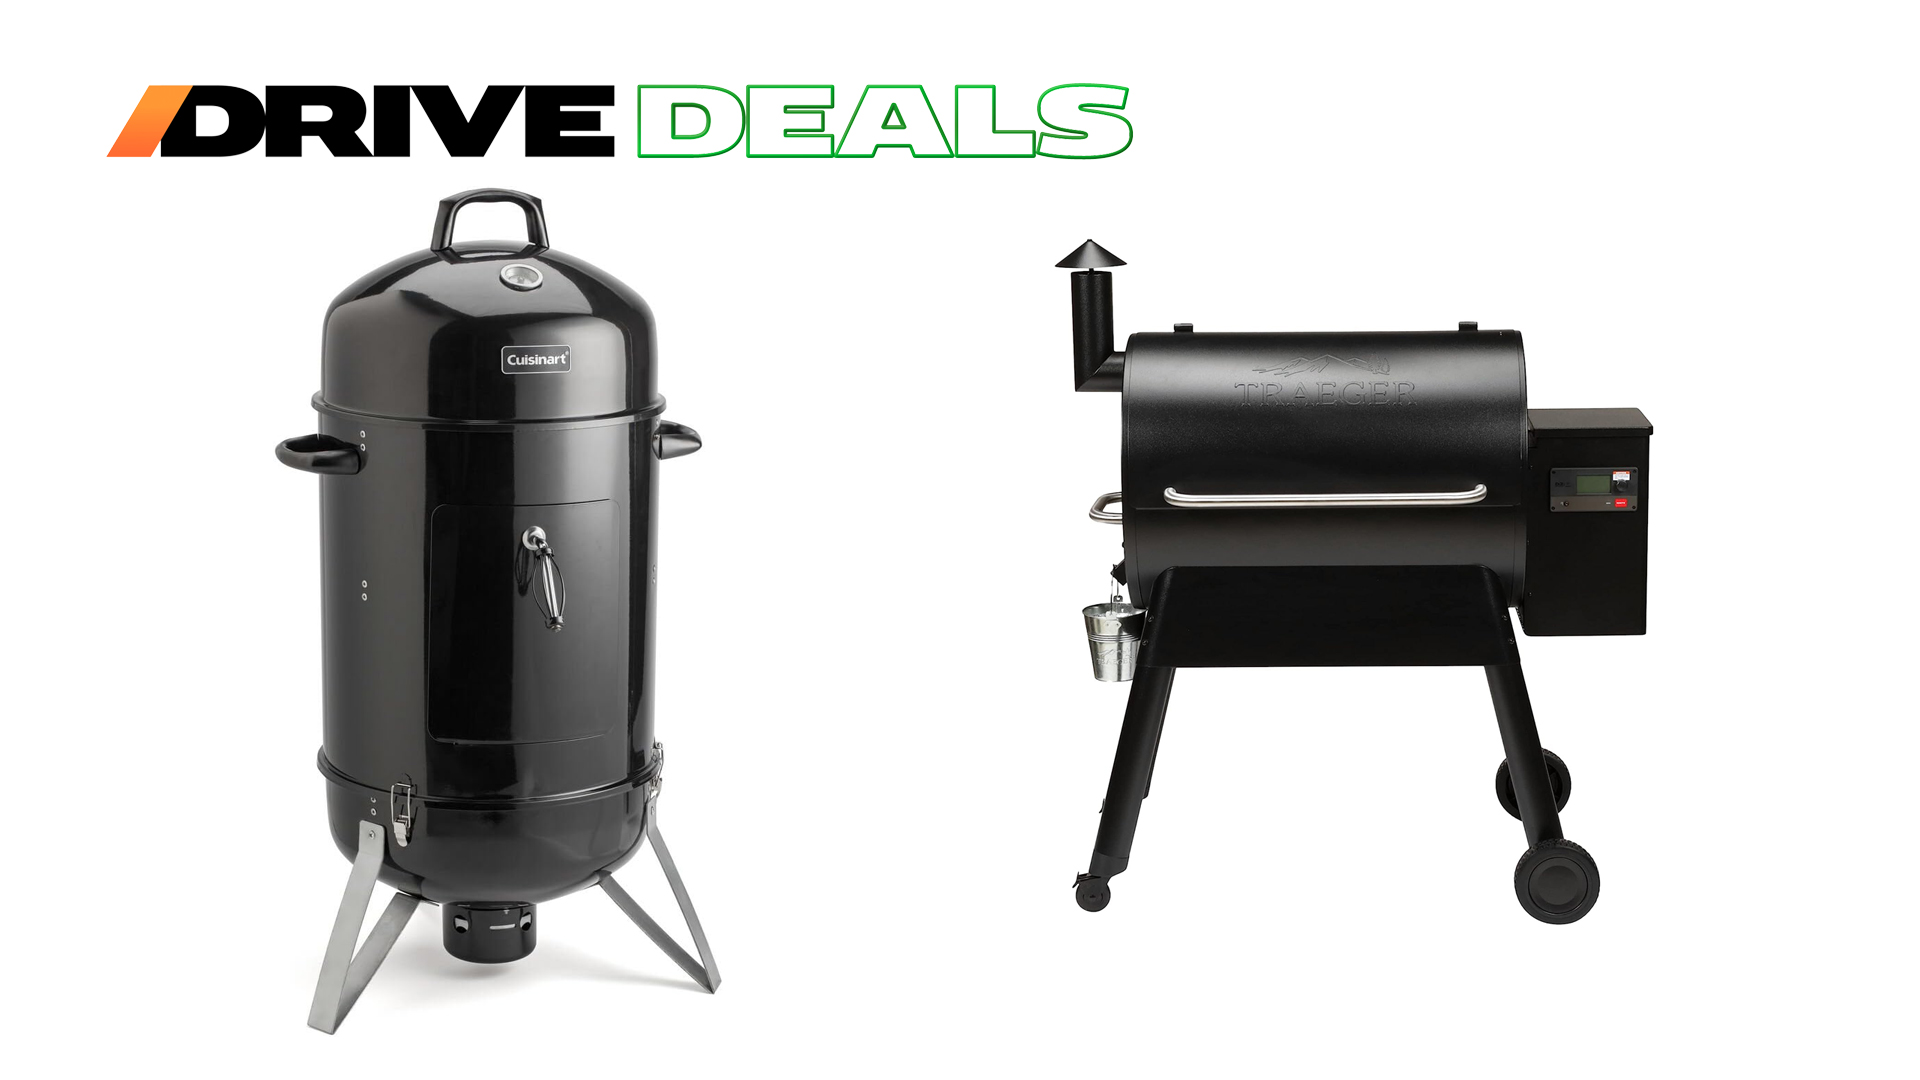 Traeger And More Have Insane Smoker Sales This Prime Day